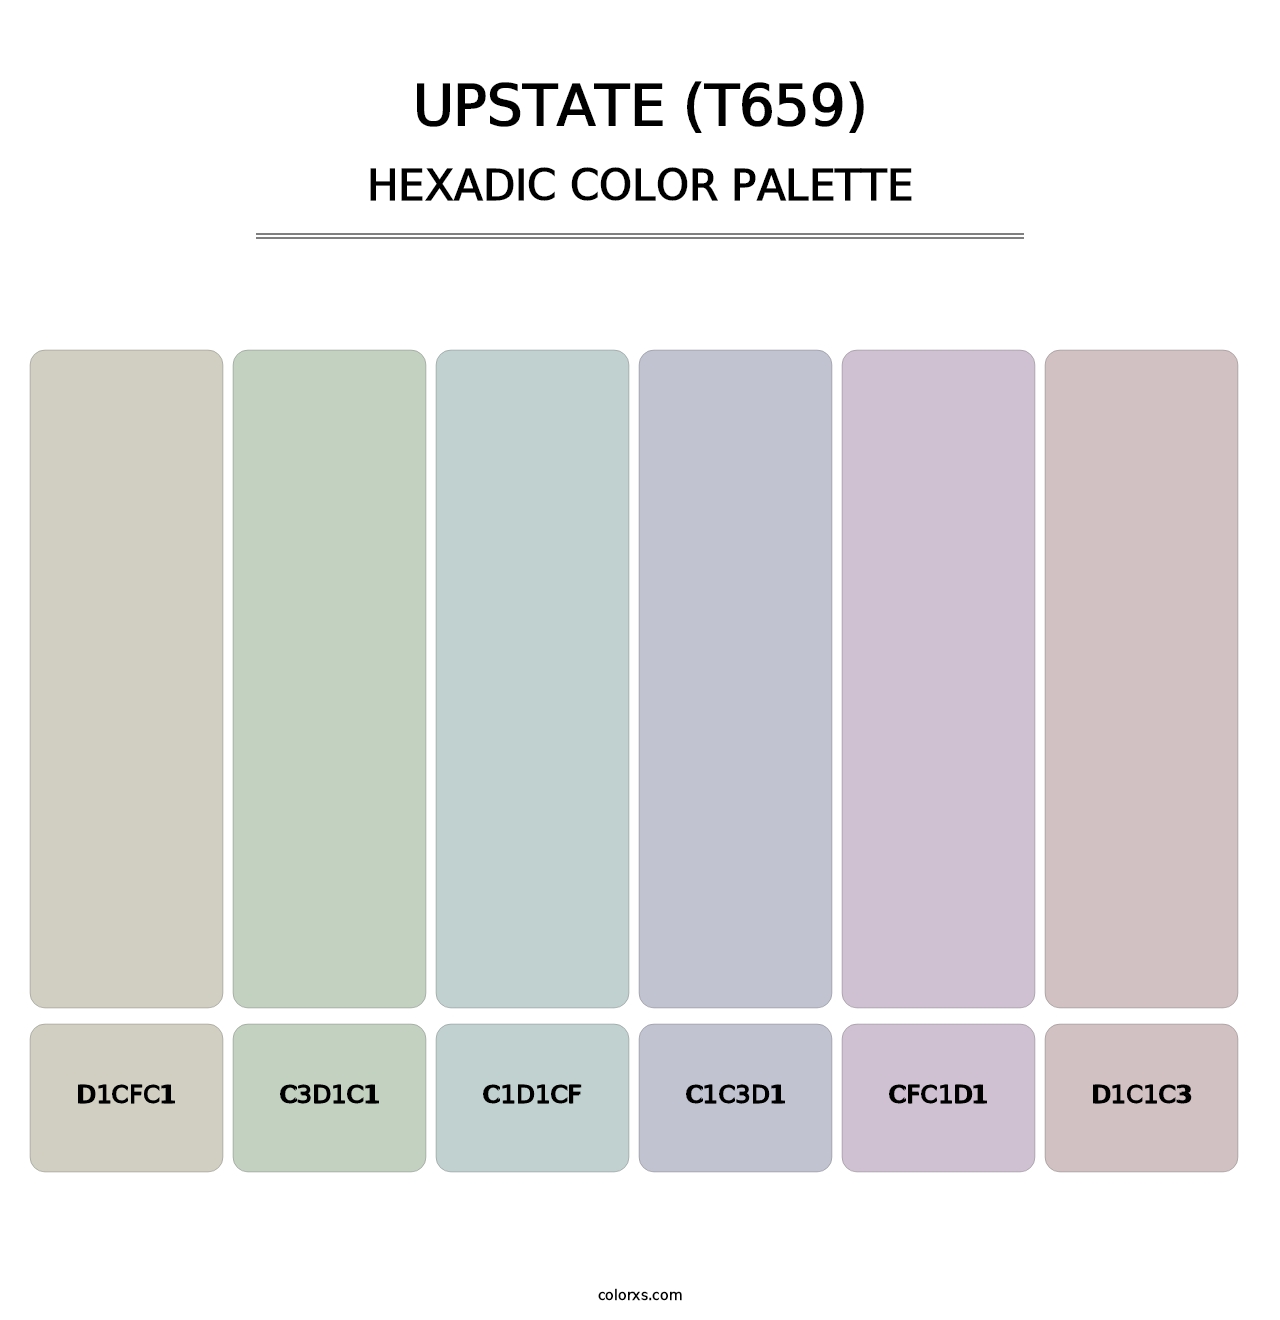 Upstate (T659) - Hexadic Color Palette